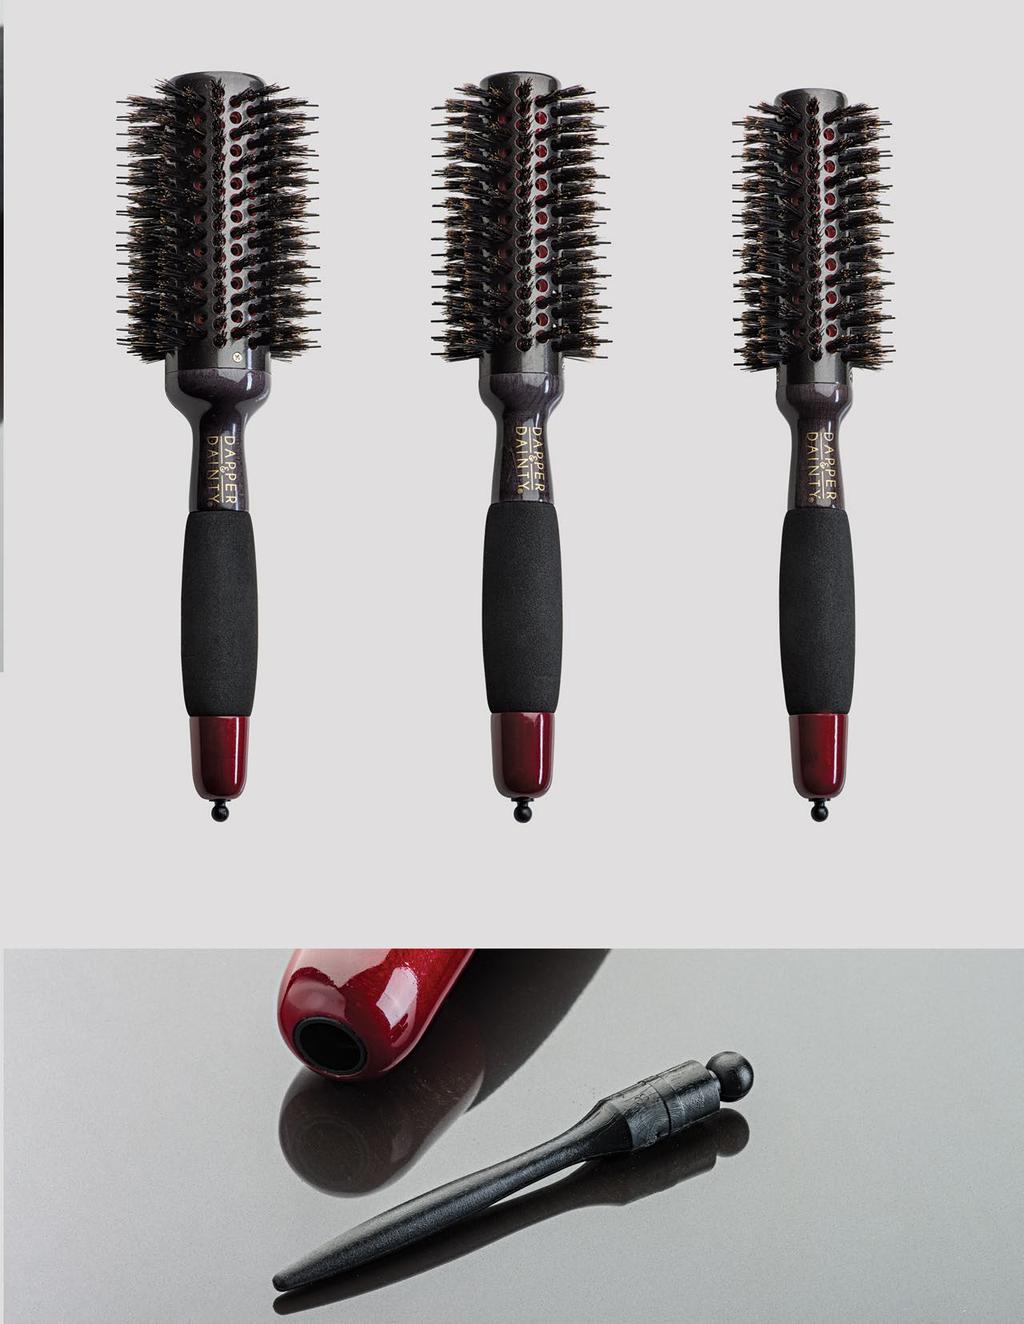 #80045 Monster Flow Professional Ceramic Ionic Vented Wooden Thermal Brush barrel Size: 3 3/8 #80046 Monster Flow Professional Ceramic Ionic Vented Wooden Thermal Brush Barrel Size: 3 #80047 Monster